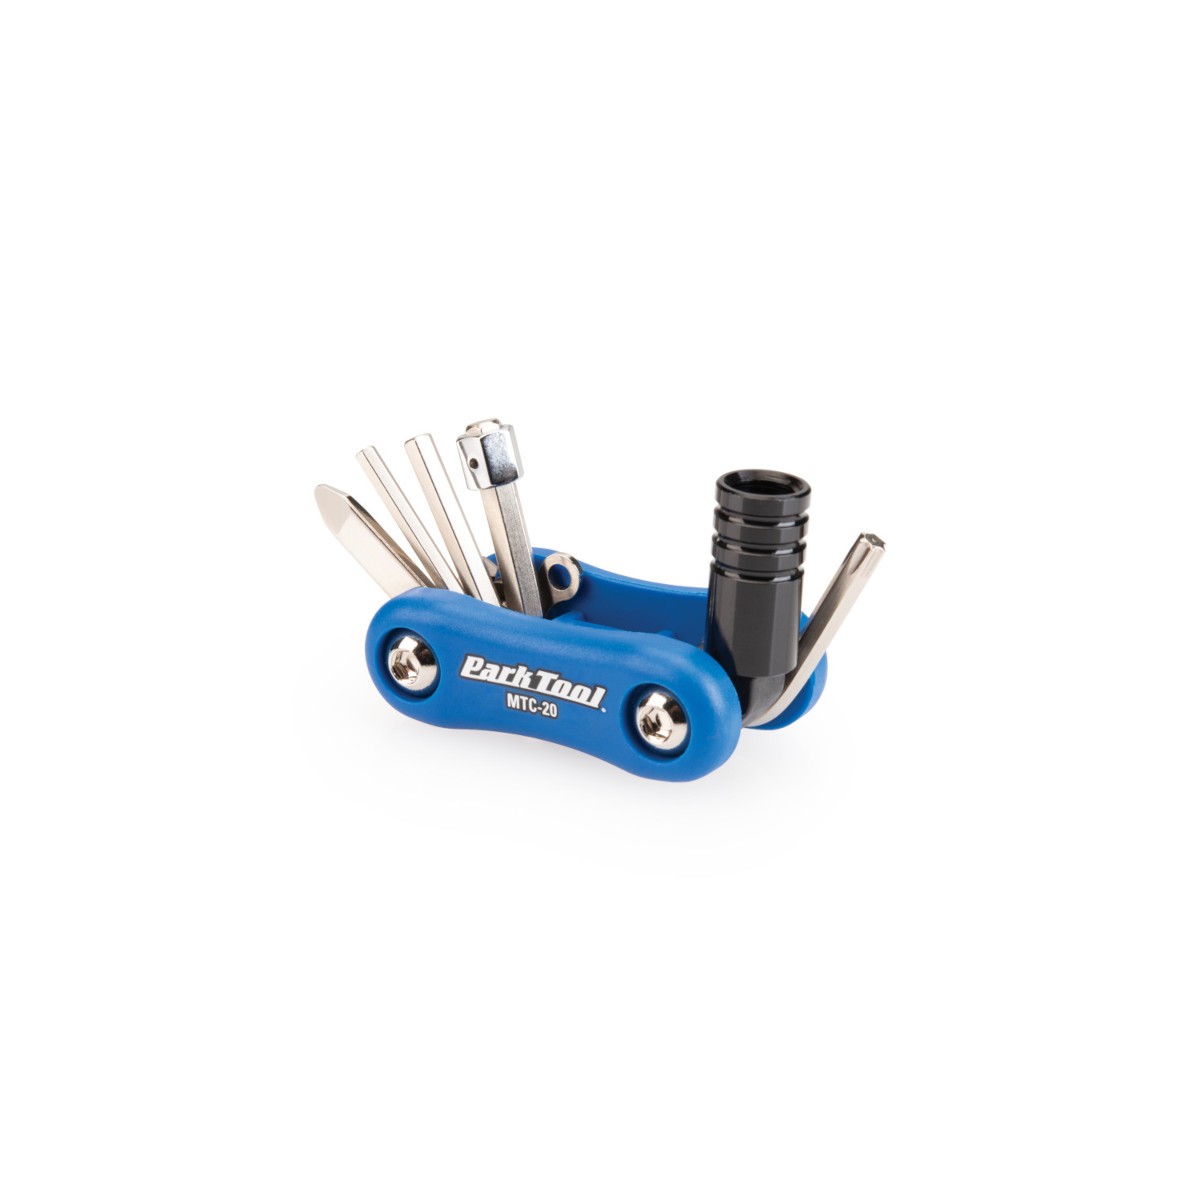 Park Tool Outil Multifonction